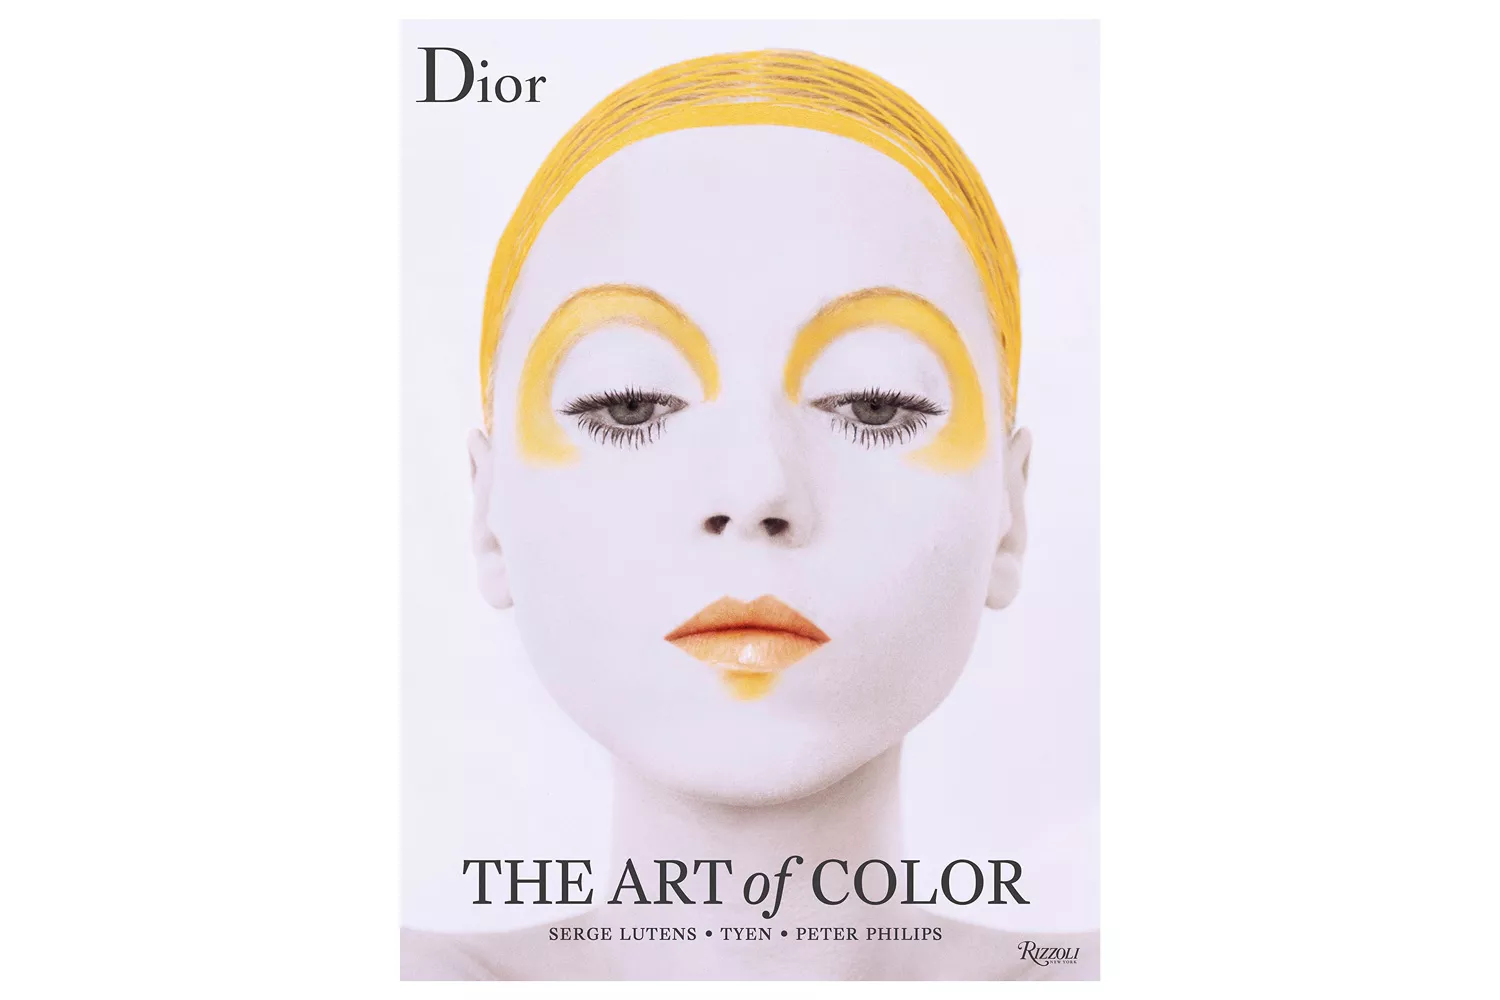 Dior: The Art of Color